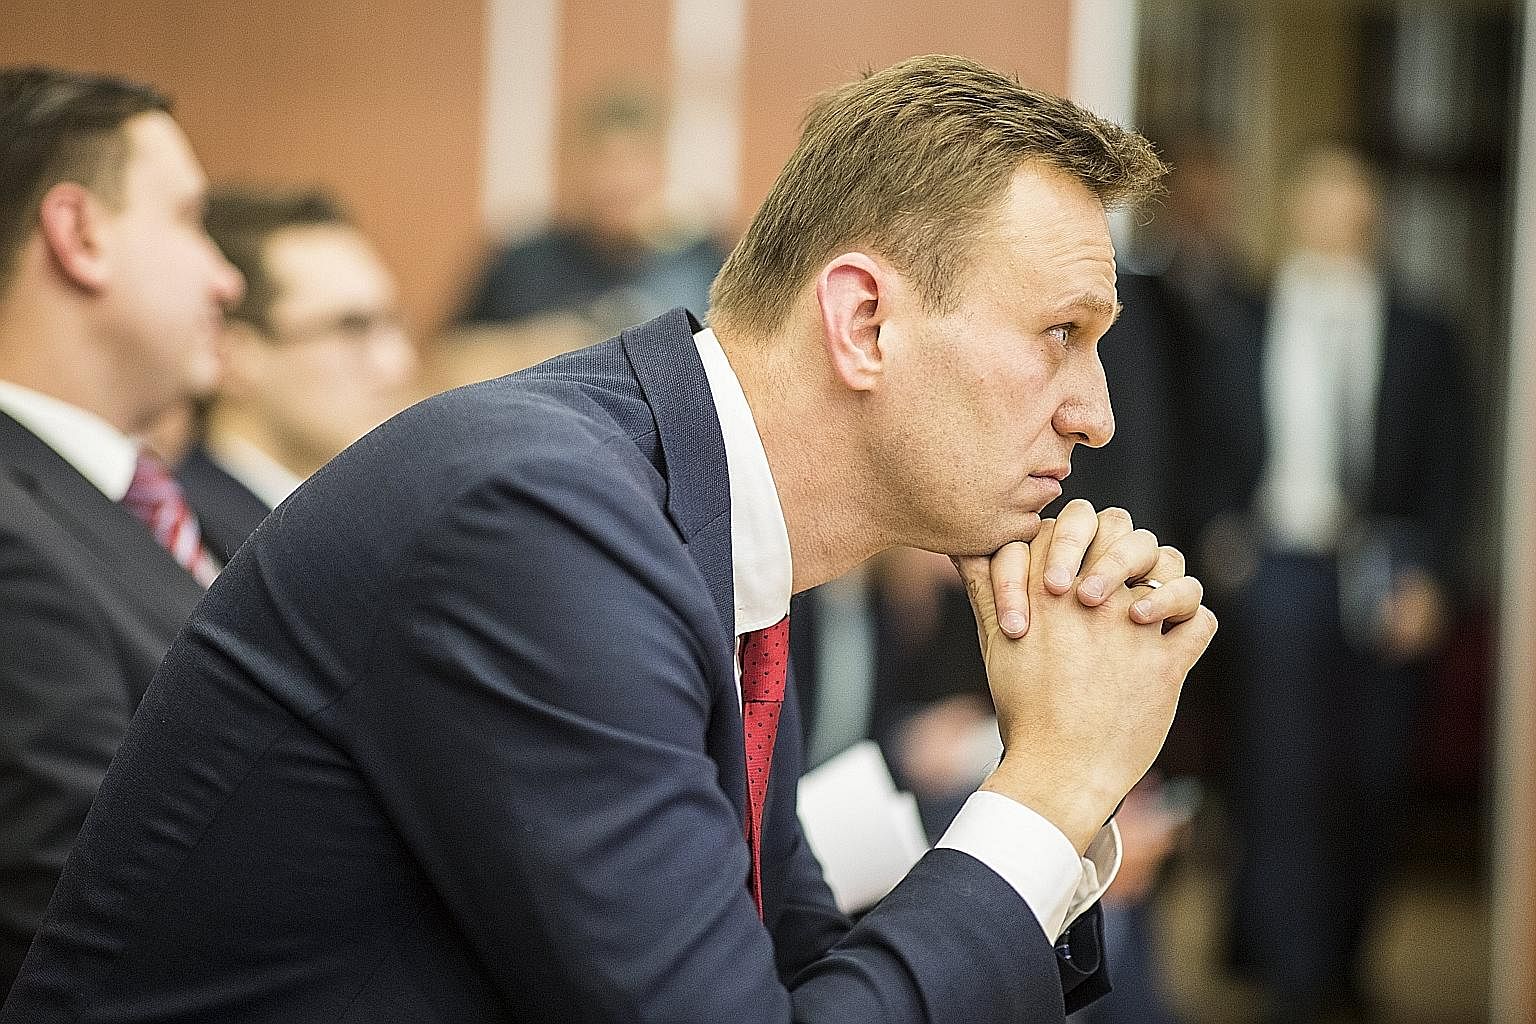 Opposition leader Alexei Navalny at the Russian Central Election Commission in Moscow on Monday, when he was found ineligible to be a presidential candidate next year because of a suspended prison sentence.